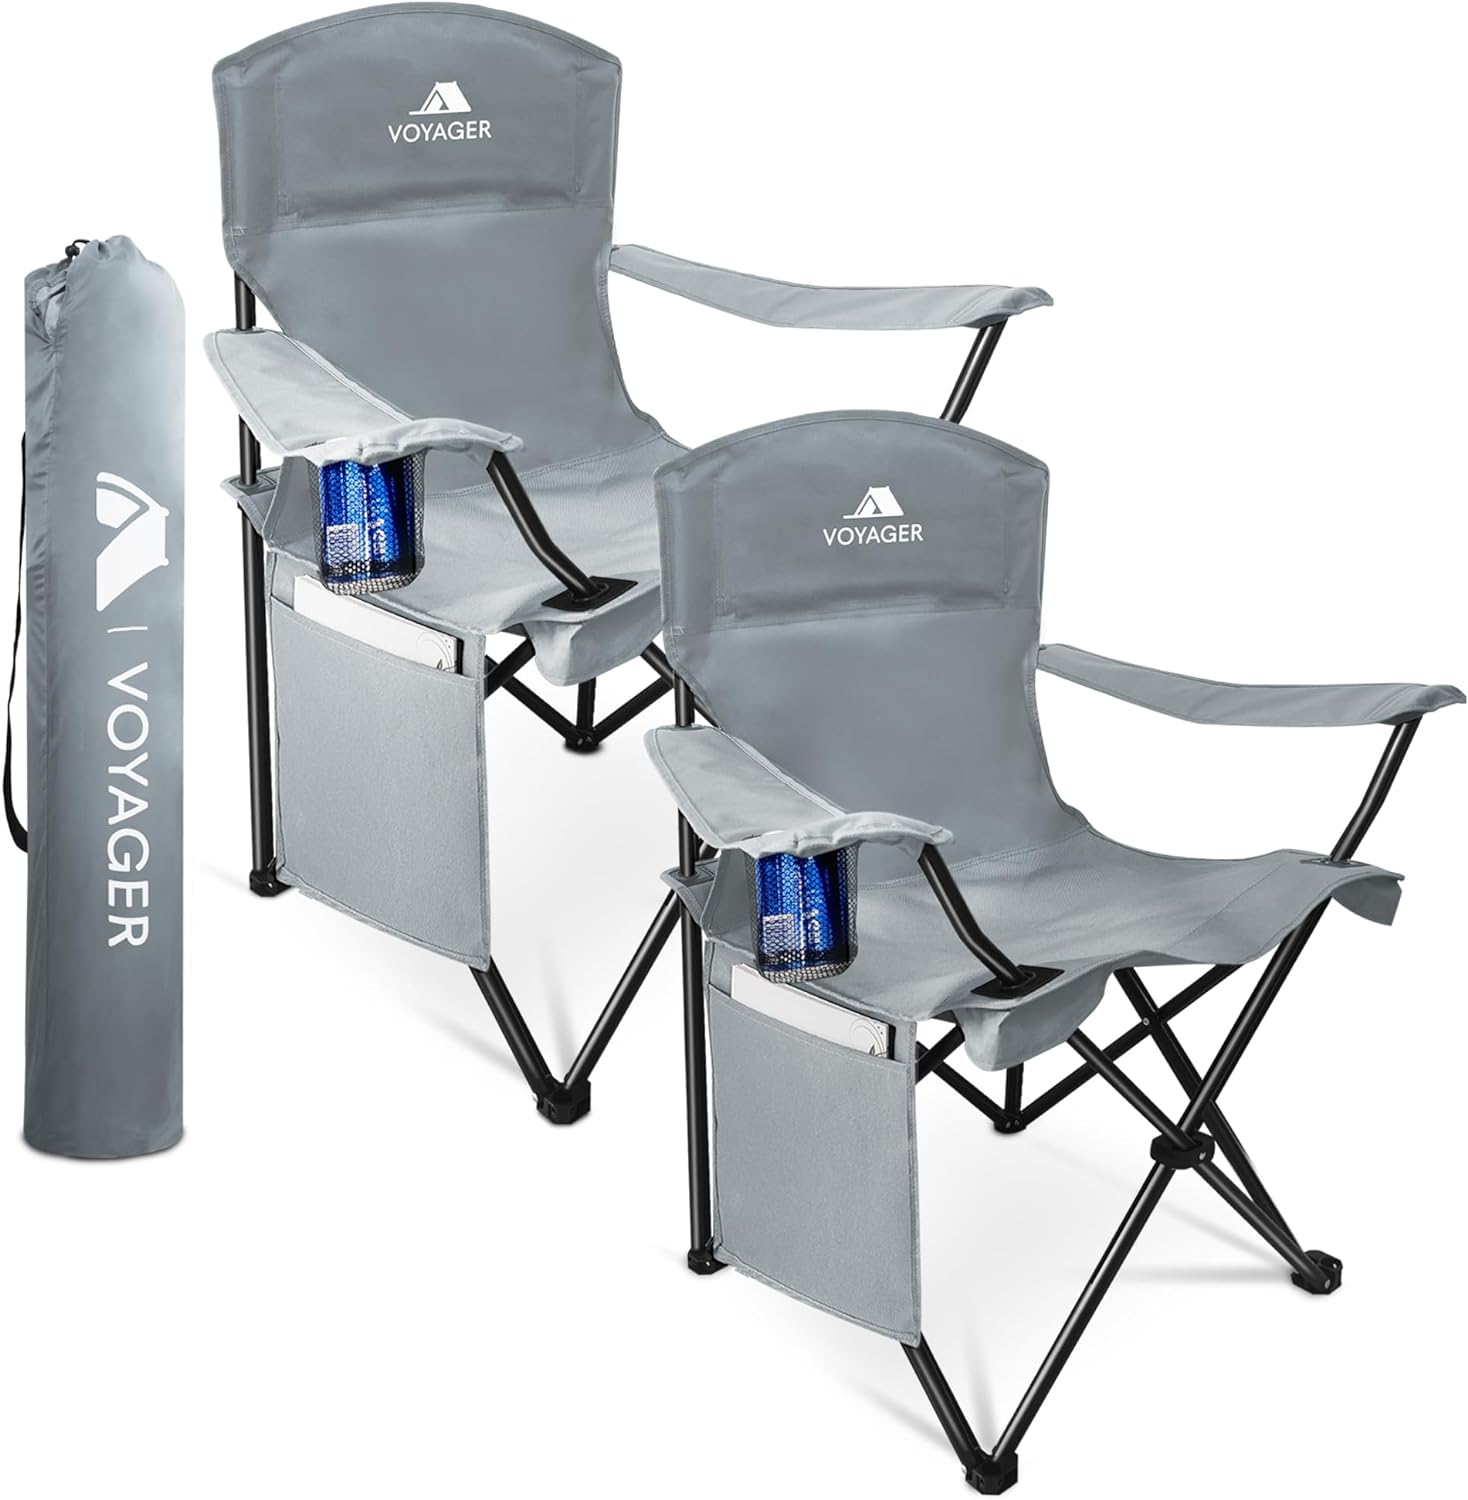 Voyager Folding Camping Chair 2-Pack, Lightweight with Pocket and Drinks Holder, Holds up to 120kg Each, Easy to Transport, Foldable Outdoor Chair Set